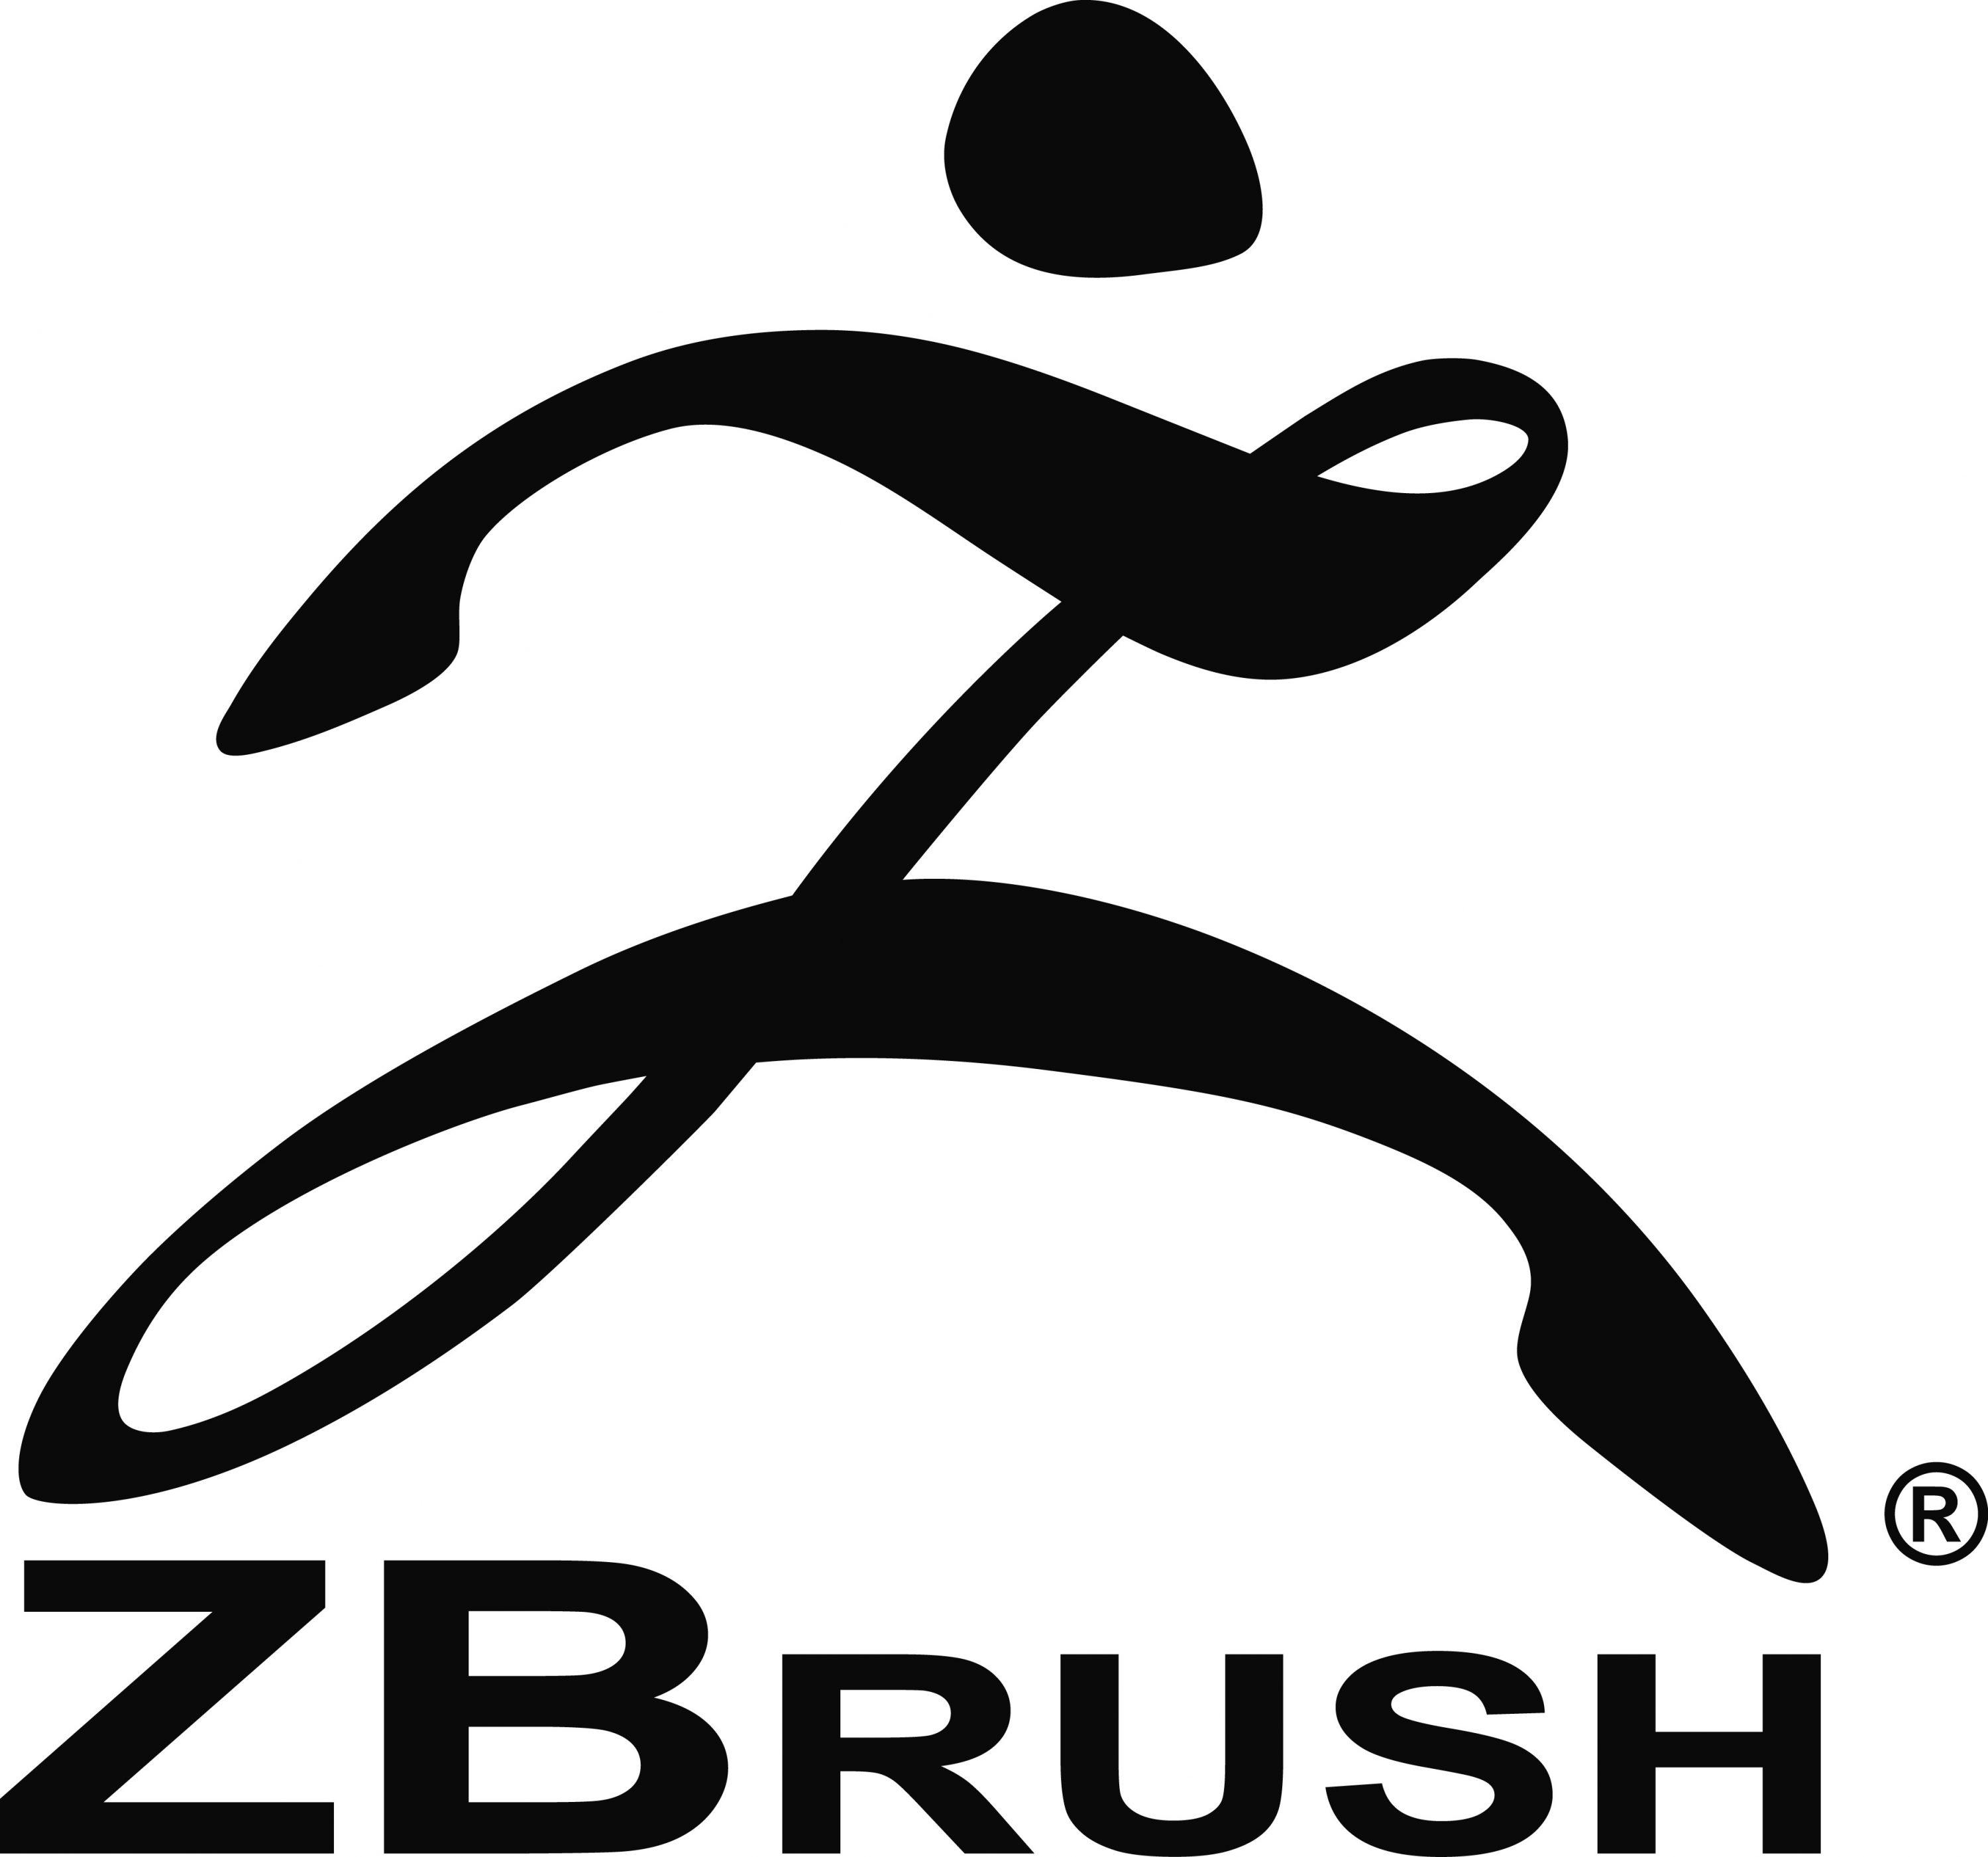 buying a student licenseof zbrush.com